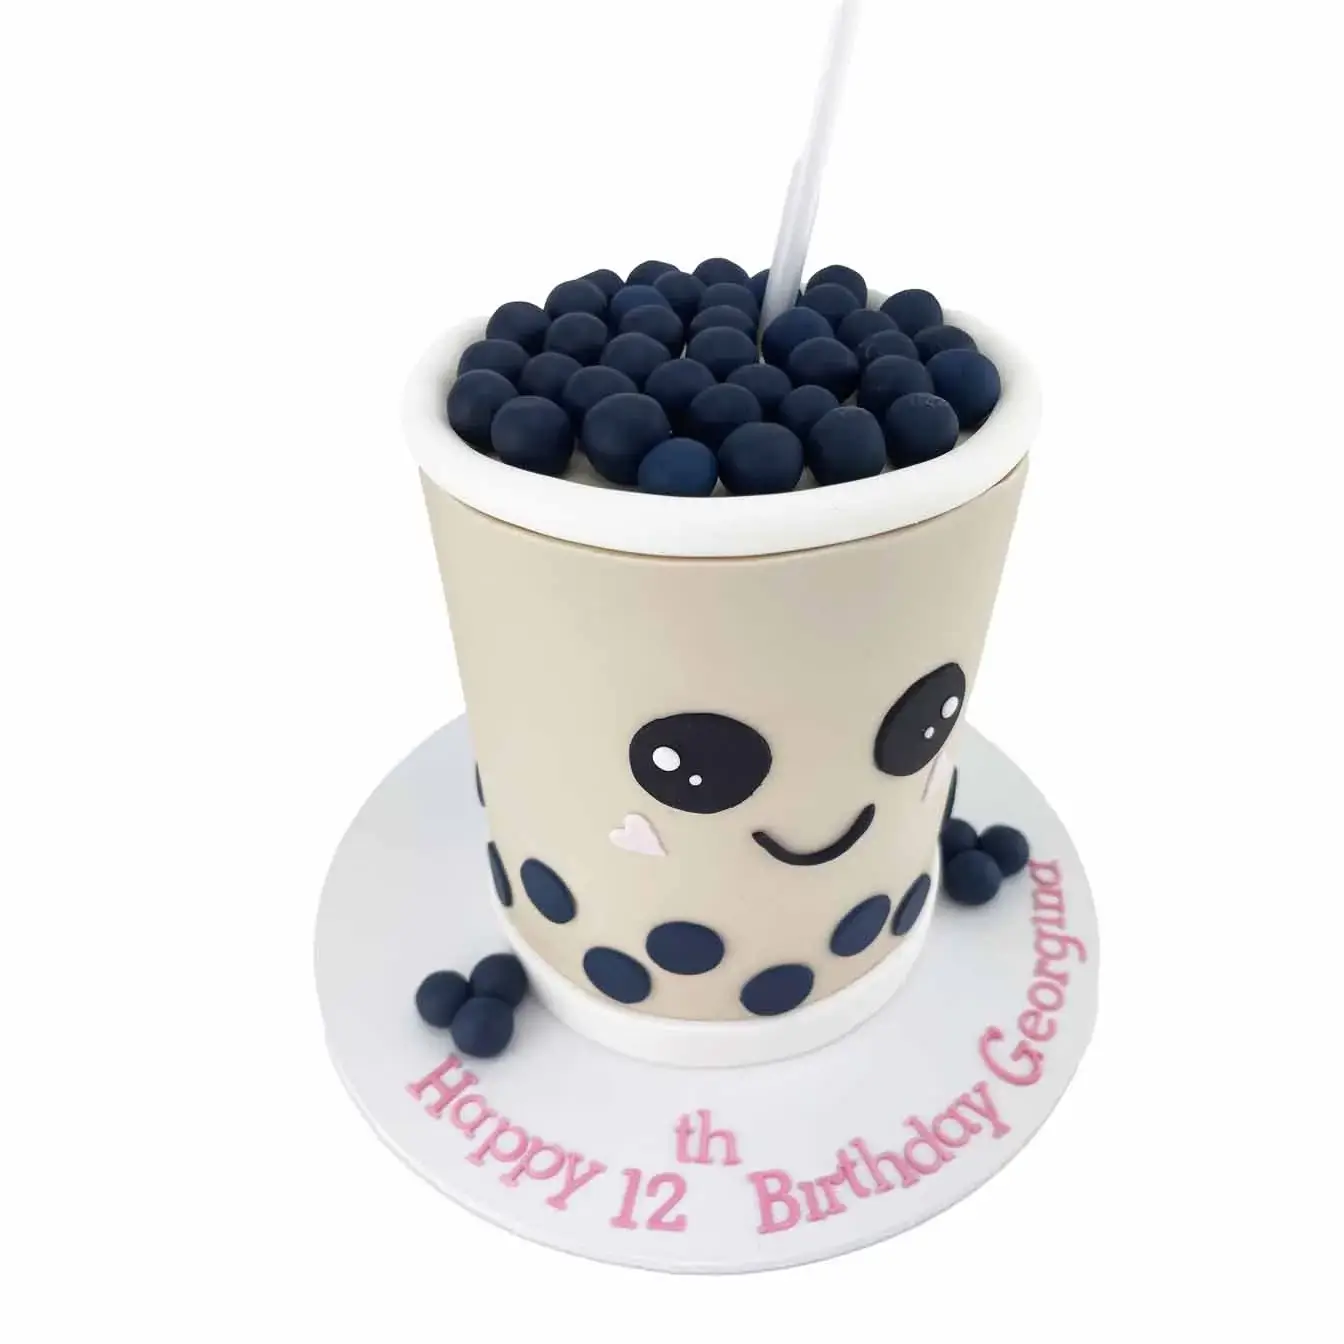 Colorful Bubble Tea Cake with playful design and delicious taste, perfect for a bubble tea-themed celebration